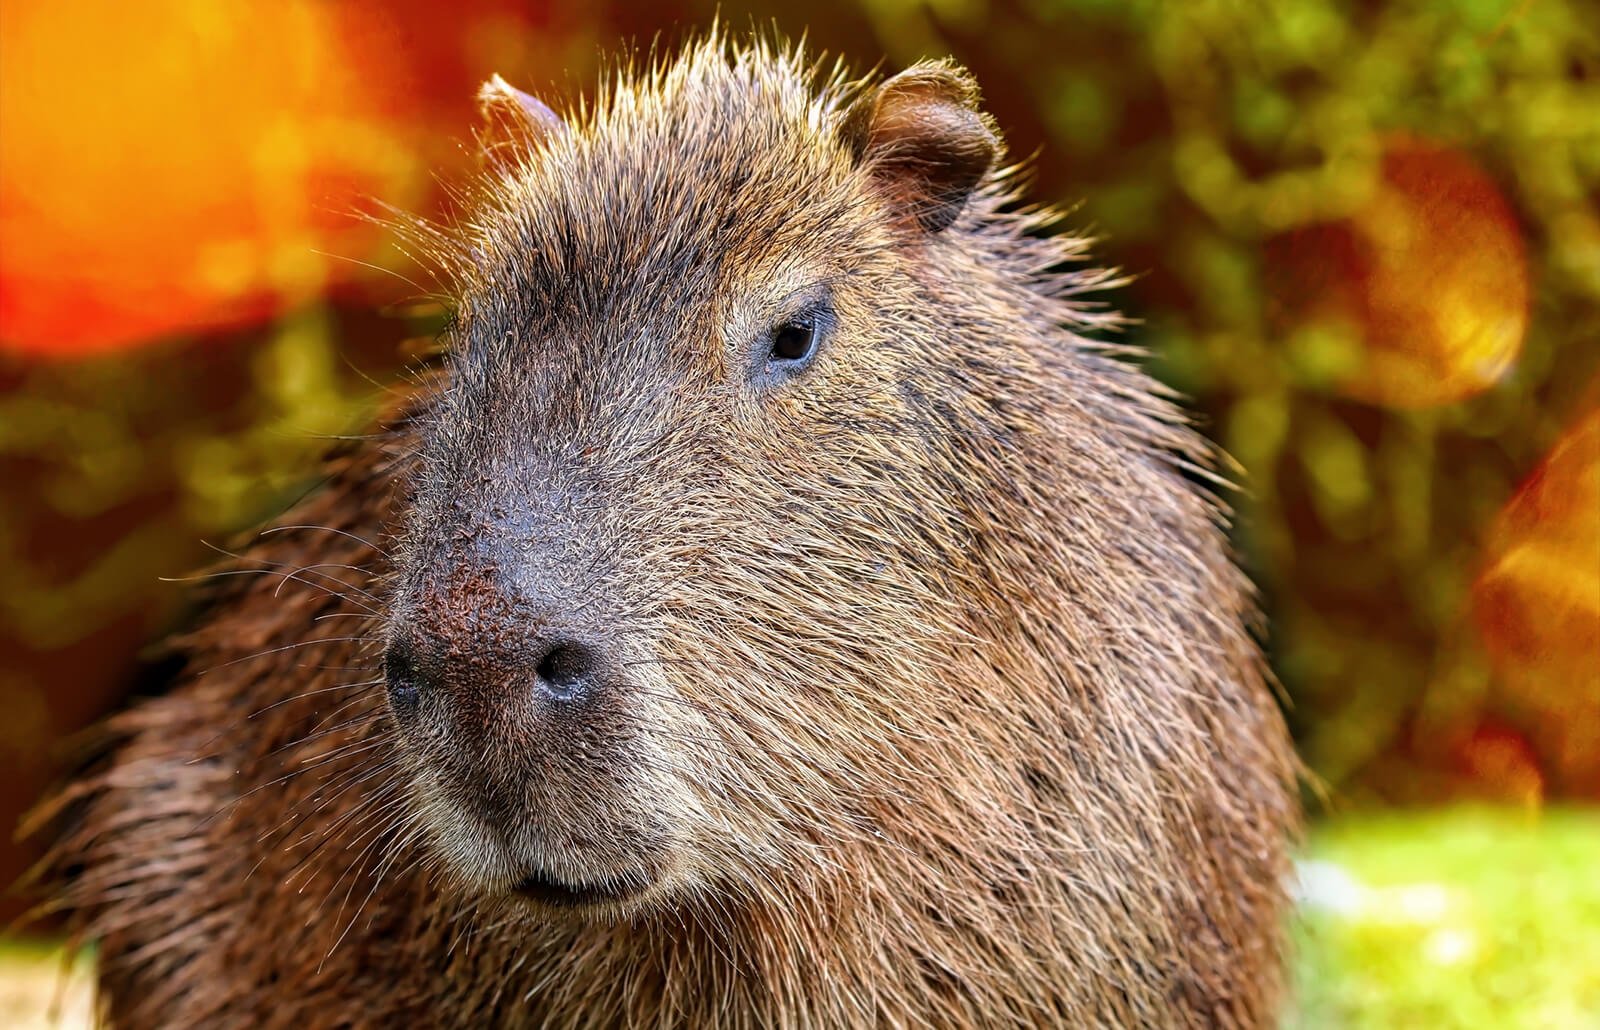 Things to Consider Before Getting a Capybara as a Pet